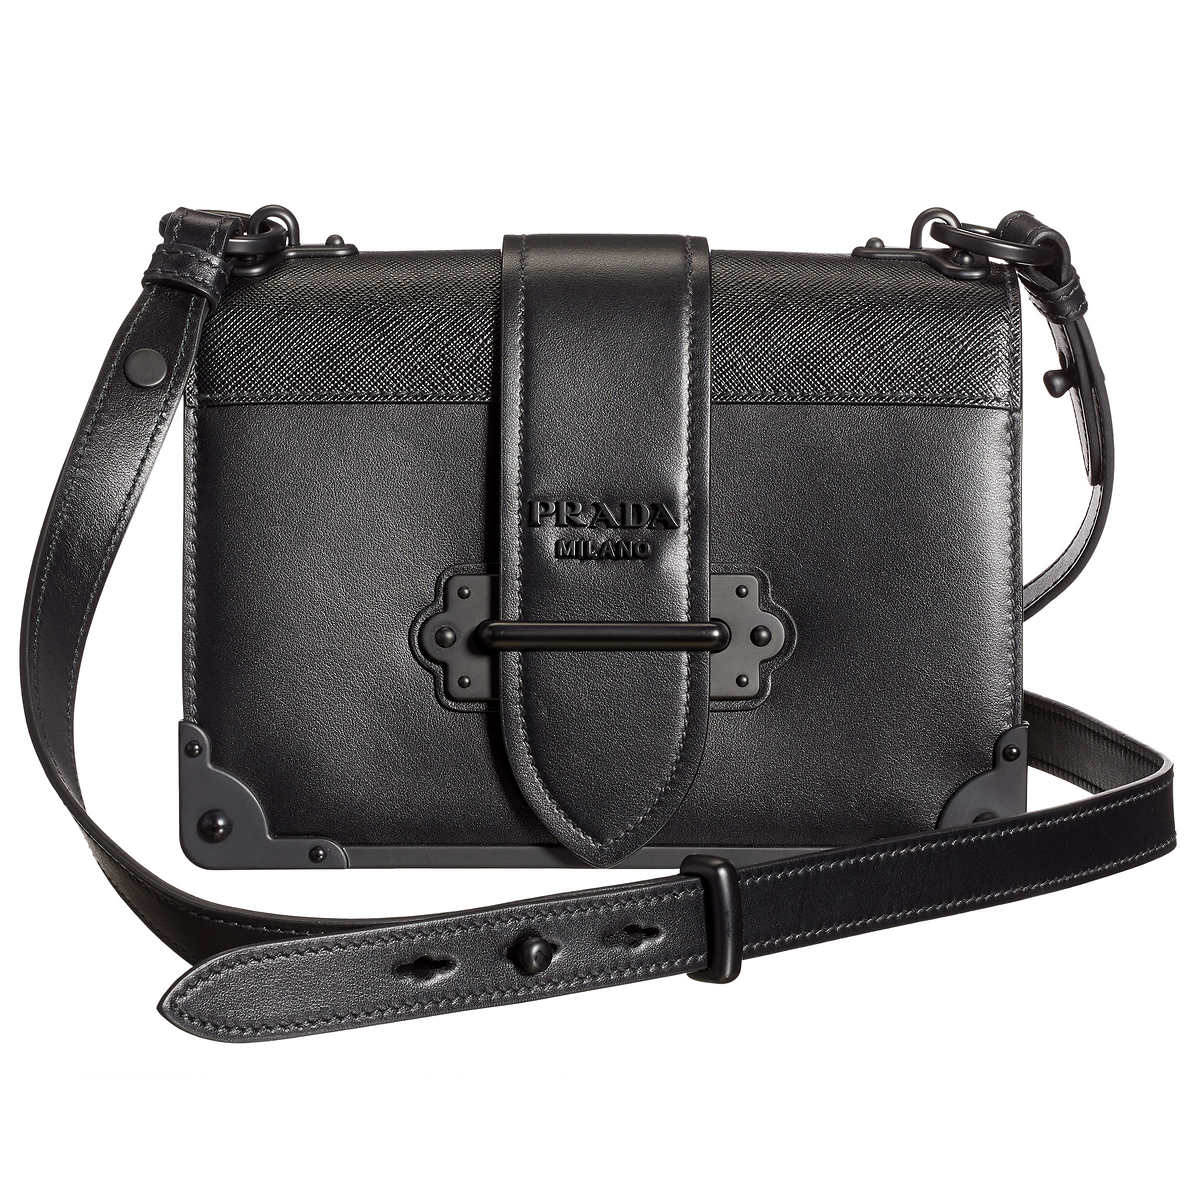 Cahier leather bag Prada Black in Leather - 24557128